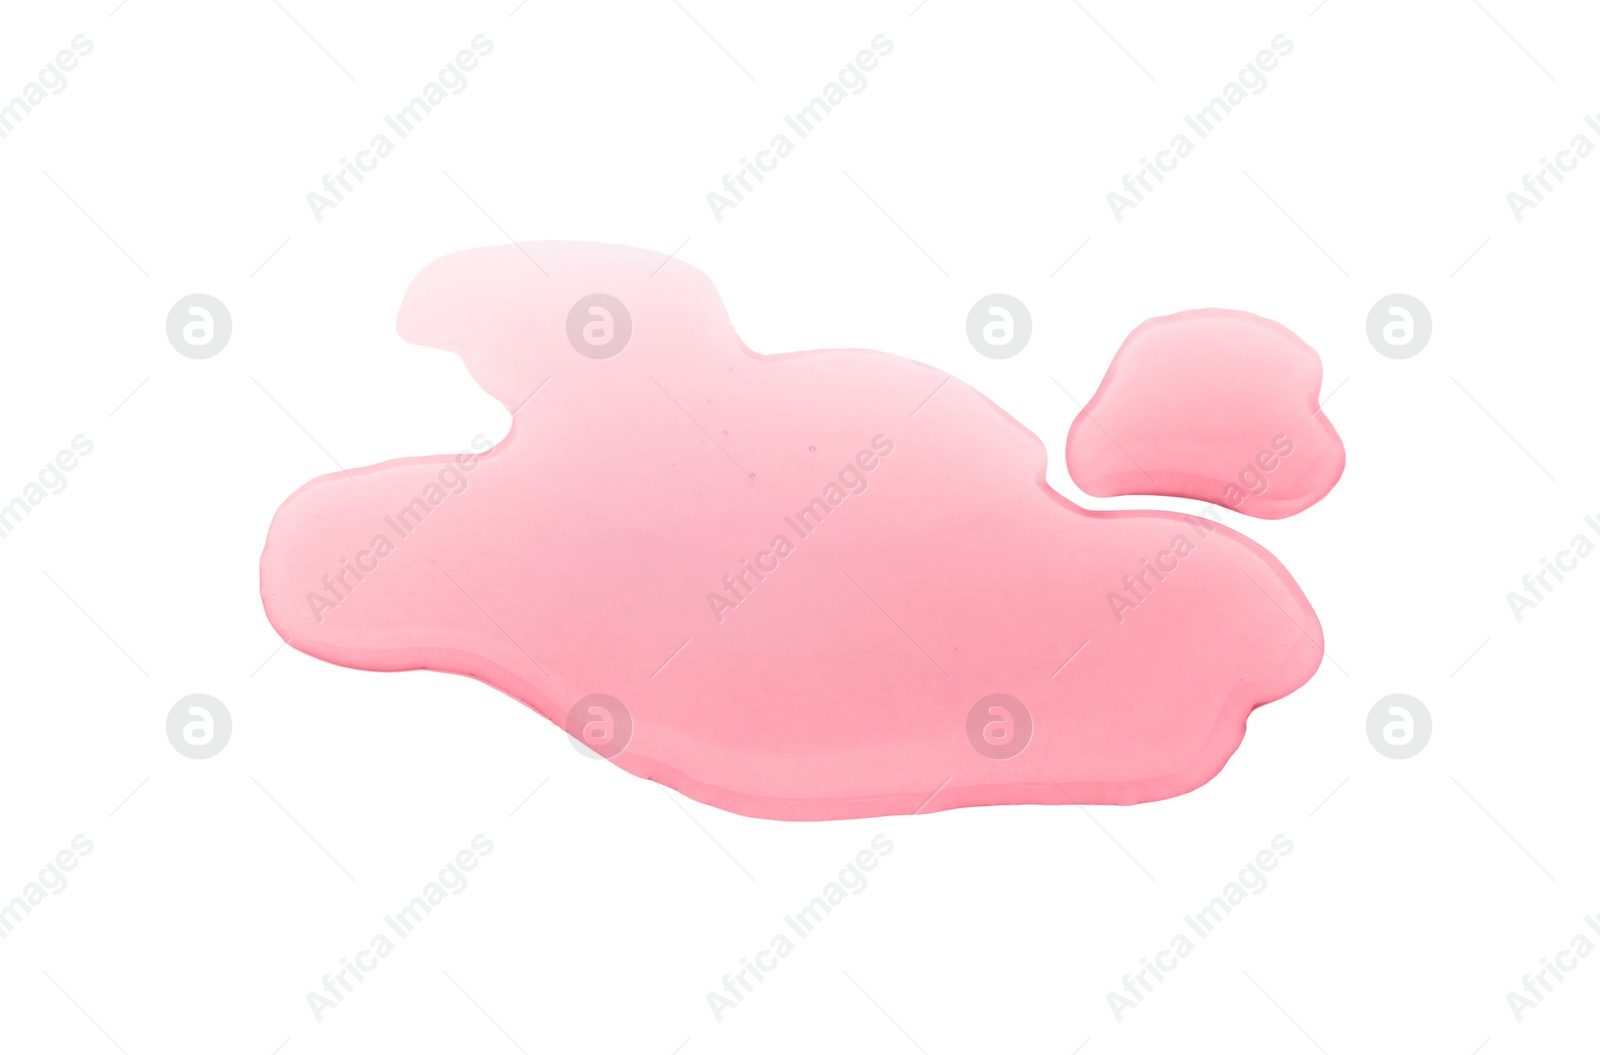 Photo of Puddle of red liquid on white background